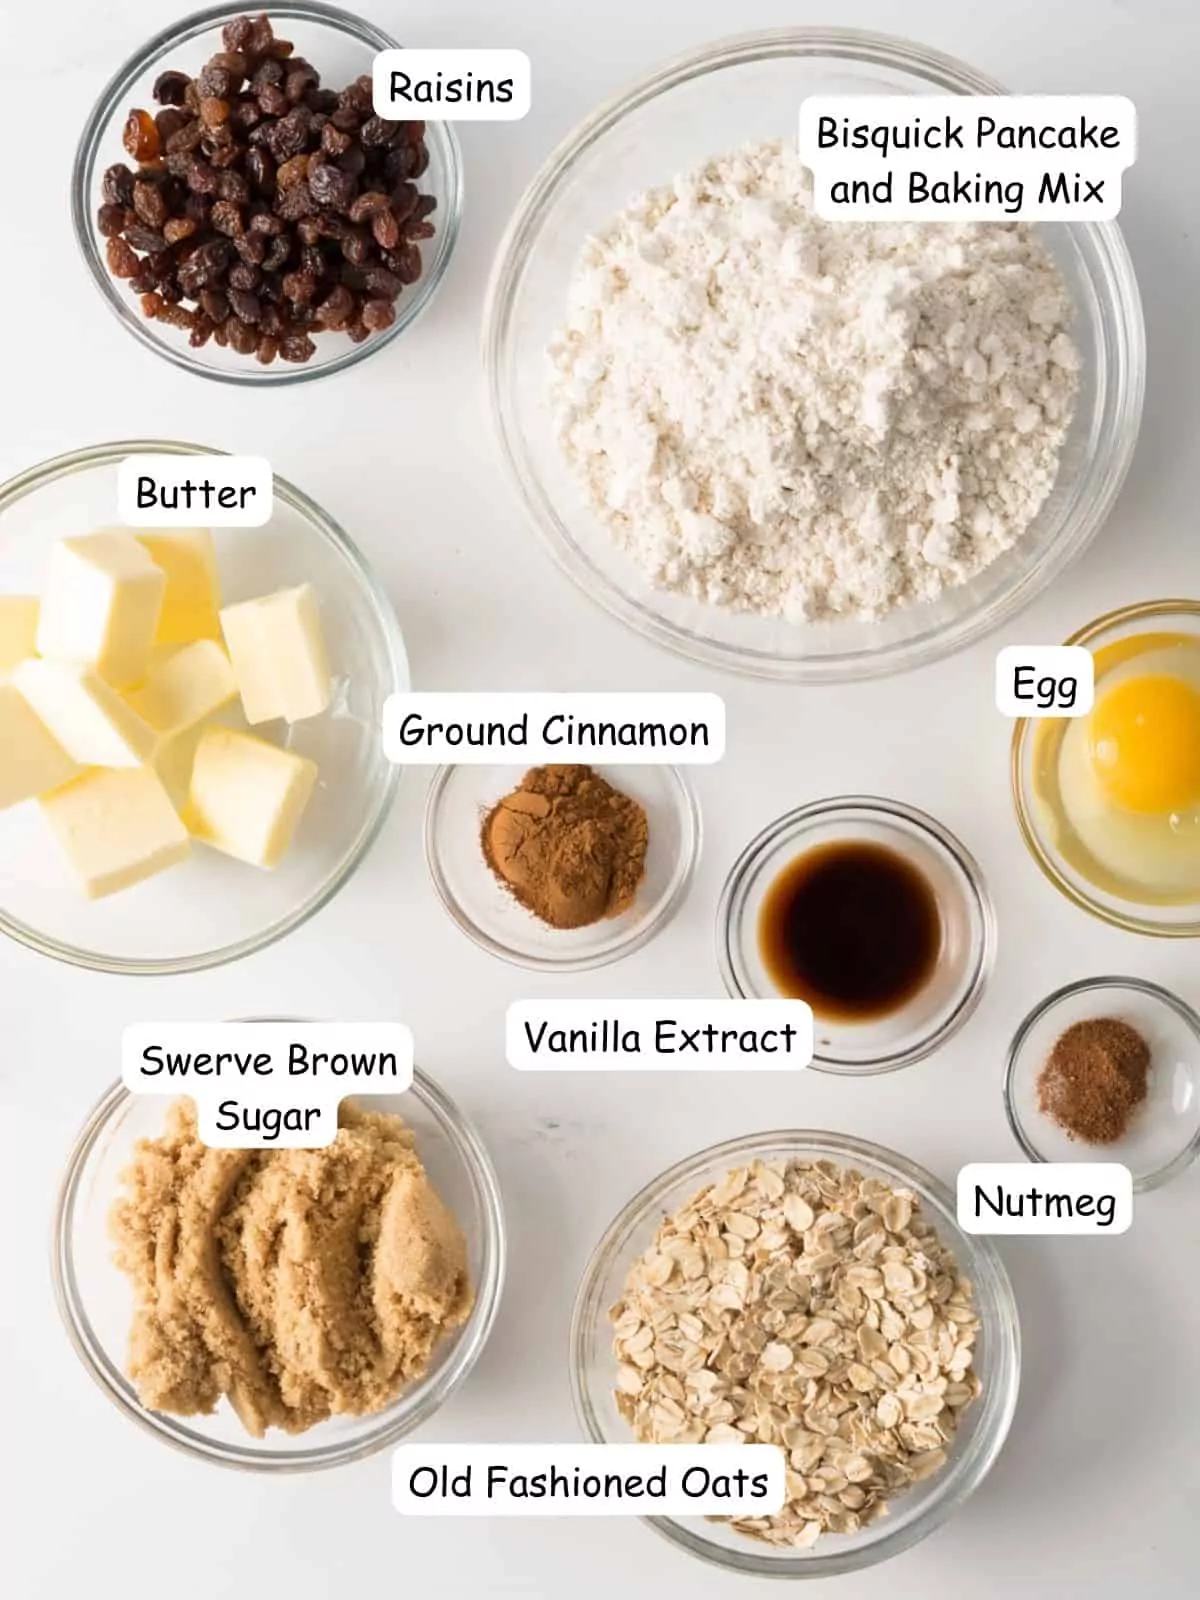 Ingredients for Sugar Free Oatmeal cookies for diabetics.